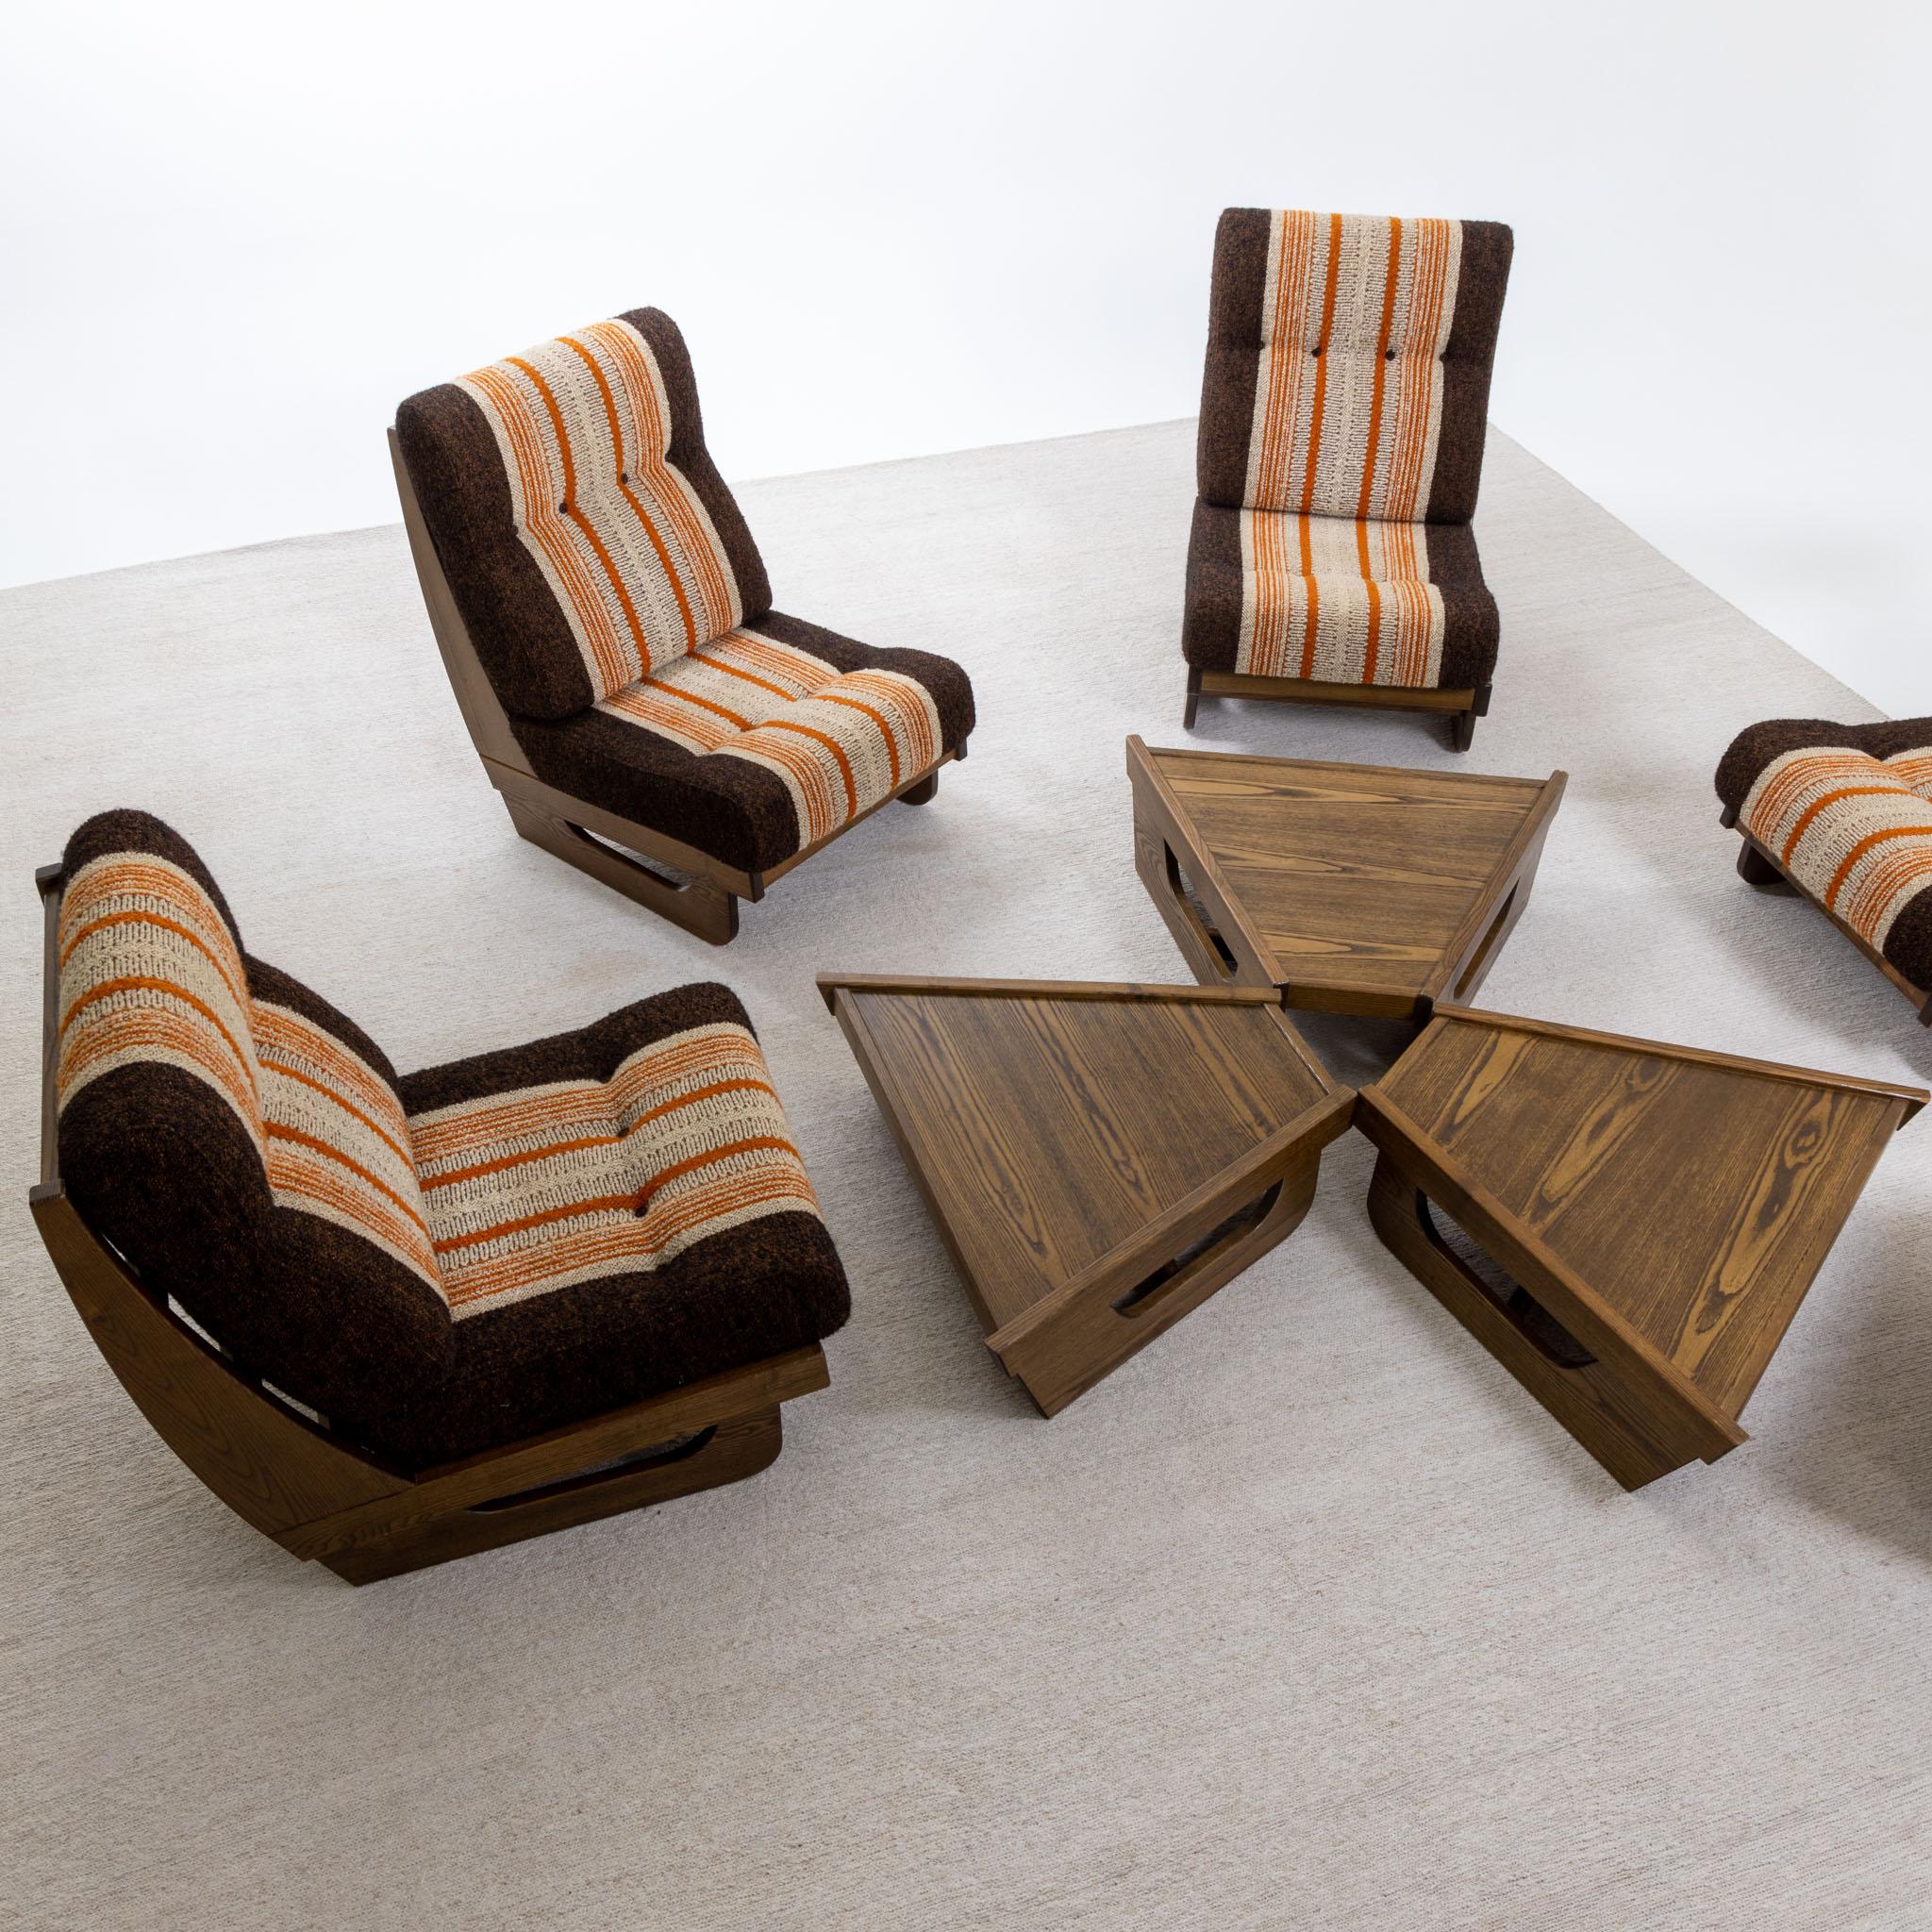 Modular Seating Group with five Lounge Chairs, Italy 1950s For Sale 4